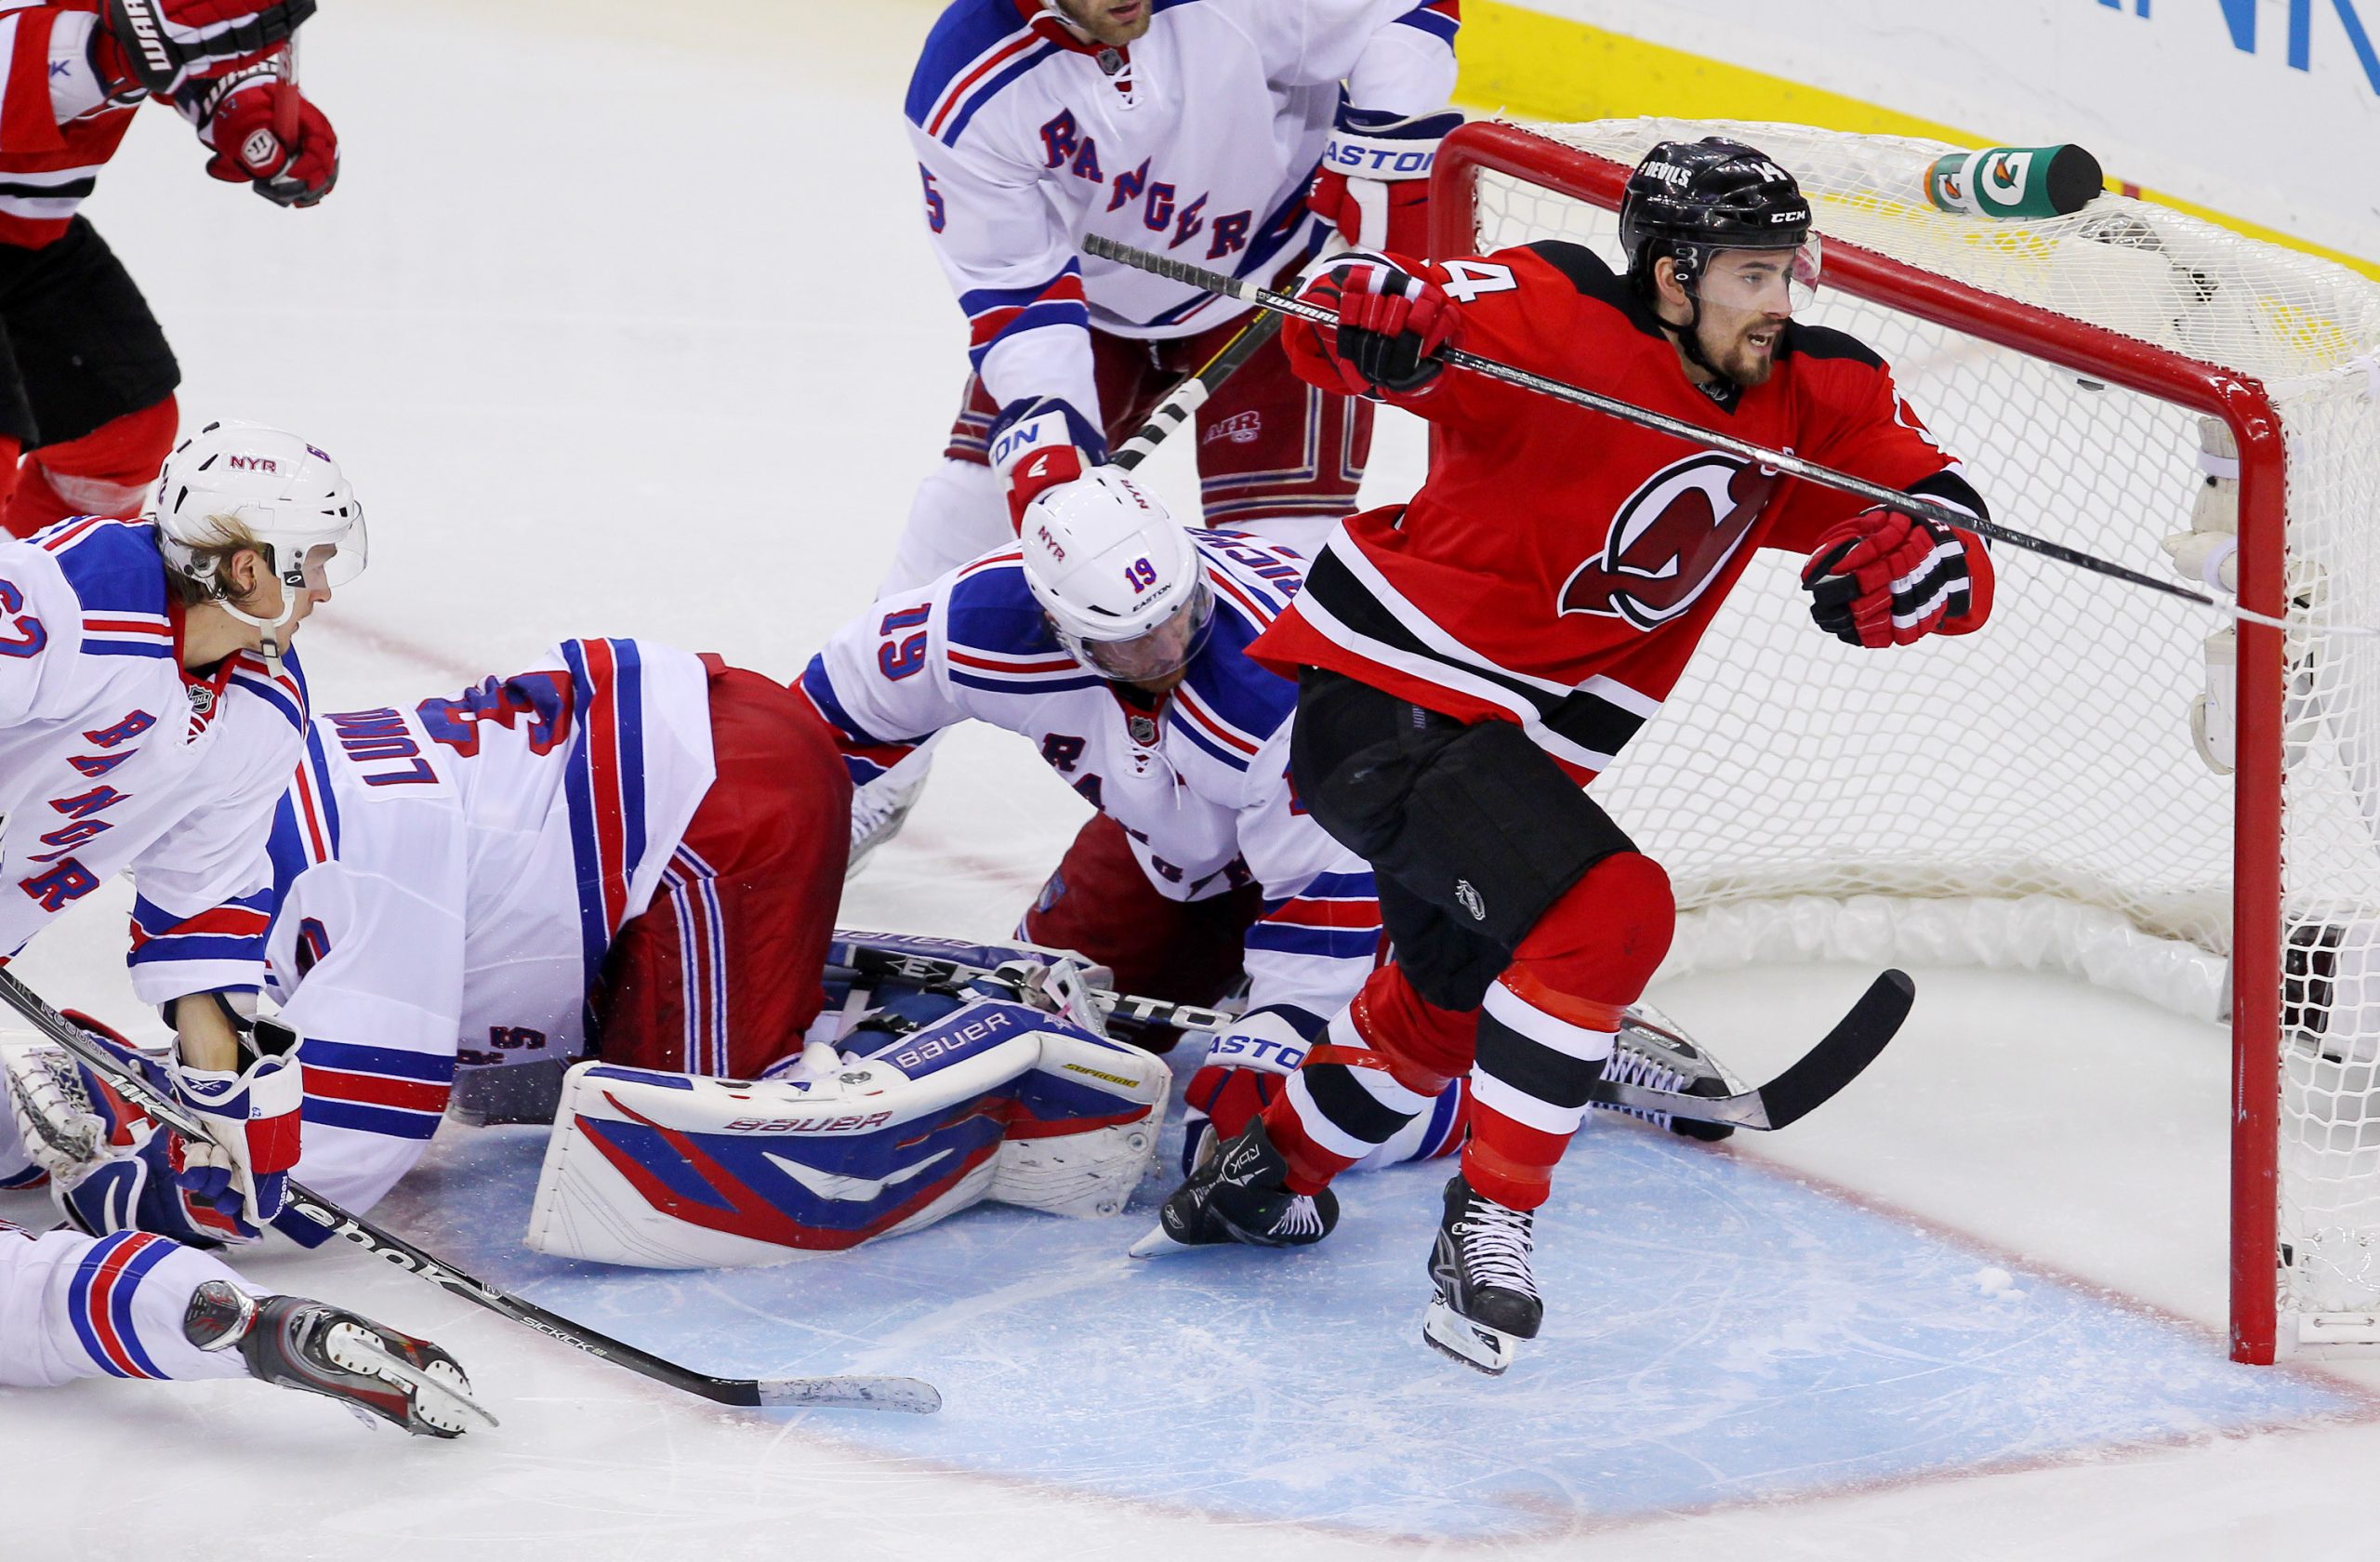 What If New Jersey Devils Had Scored Overtime Goals in 2012 Finals?